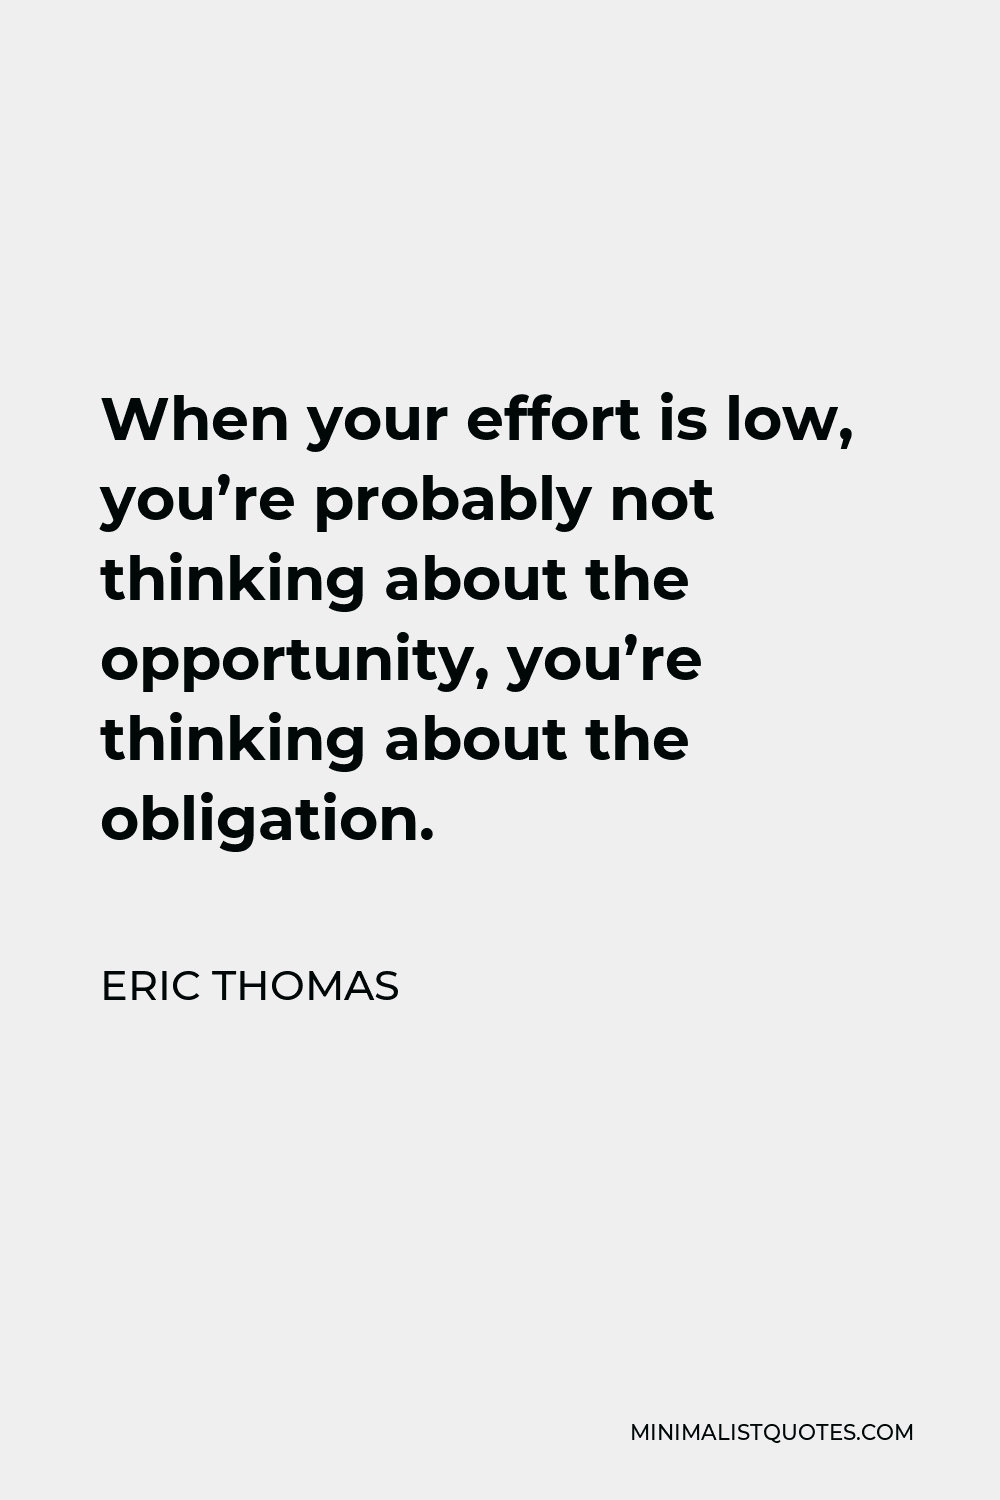 Eric Thomas Quote - When your effort is low, you’re probably not thinking about the opportunity, you’re thinking about the obligation.